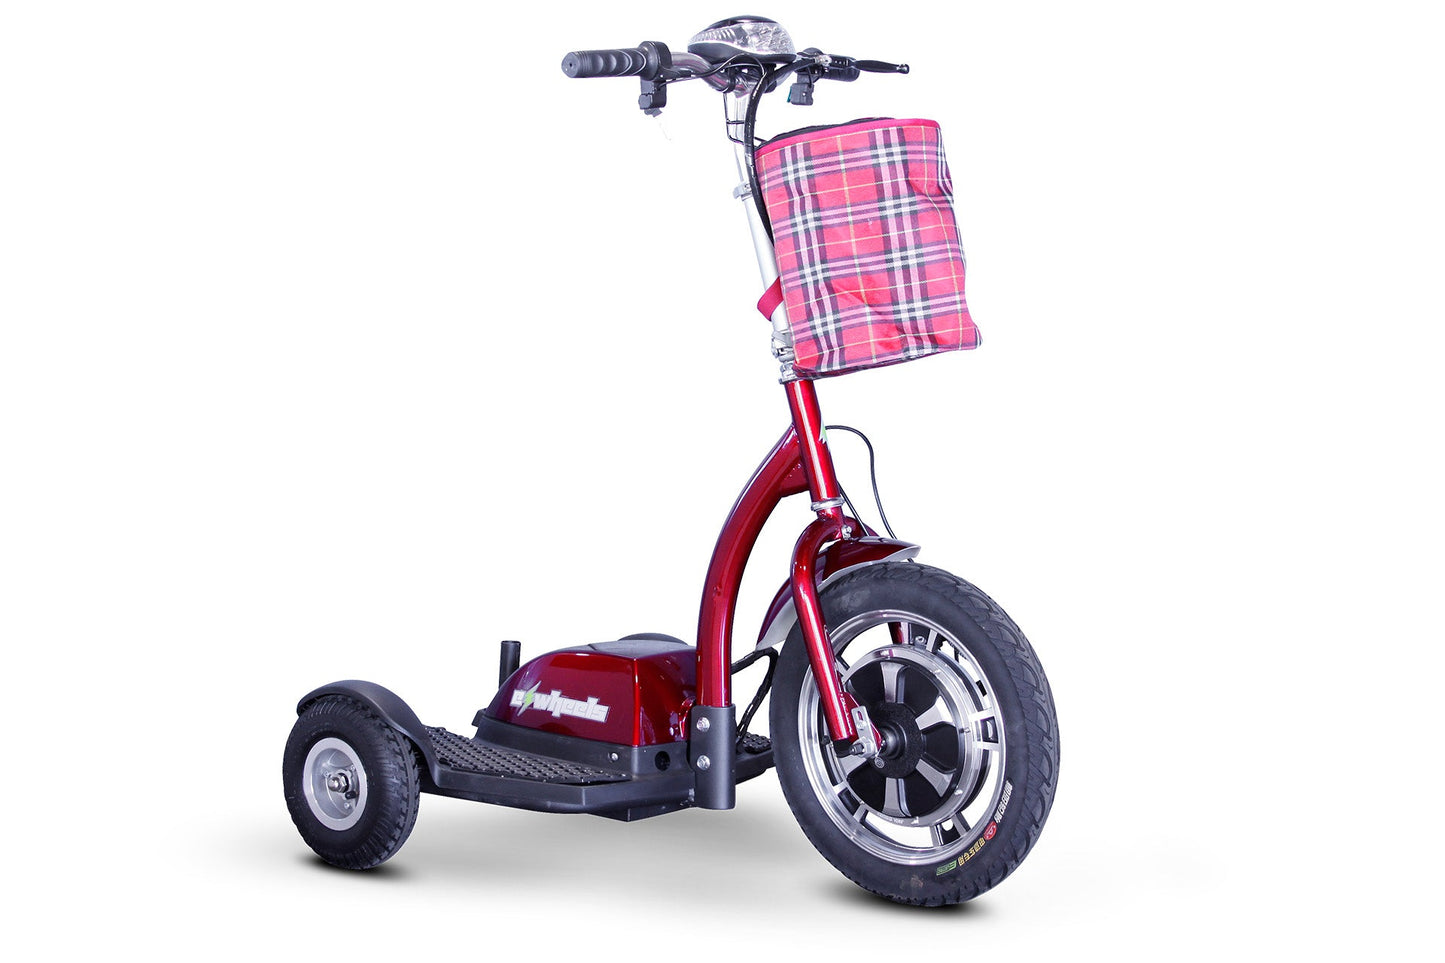 EWheels EW-18 - Assembled Electric Scooter - Get Ready to Ride! EWheels